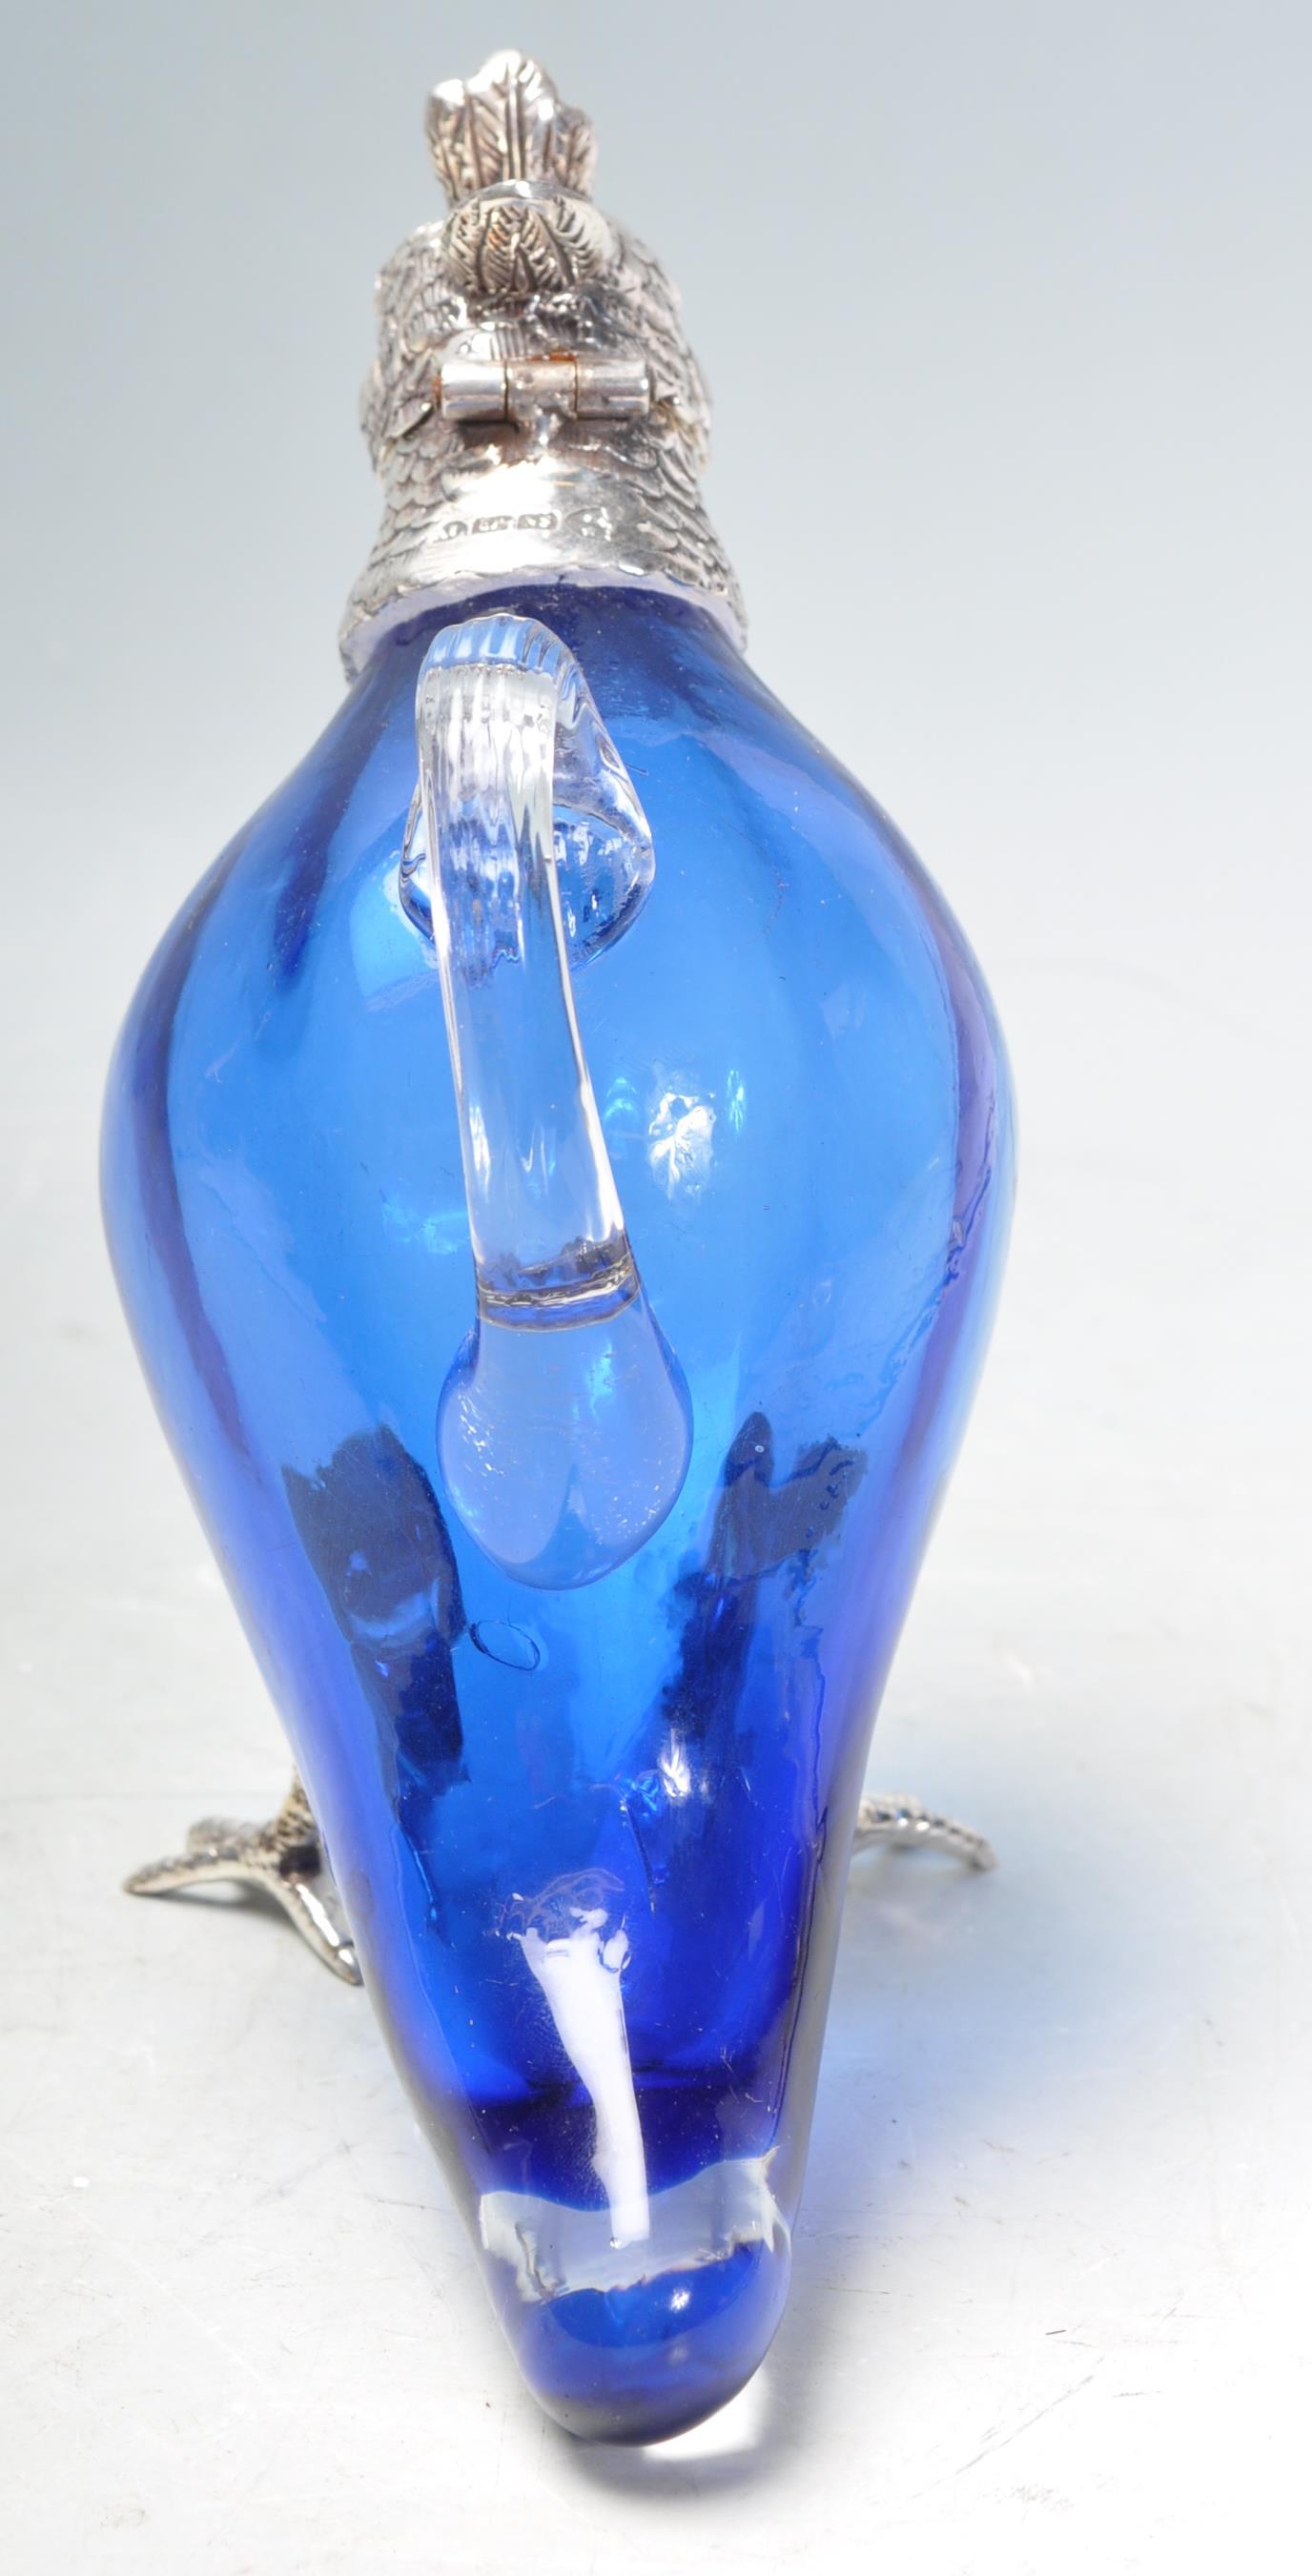 SILVER PLATE AND BLUE GLASS PARROT CLARET JUG. - Image 2 of 7